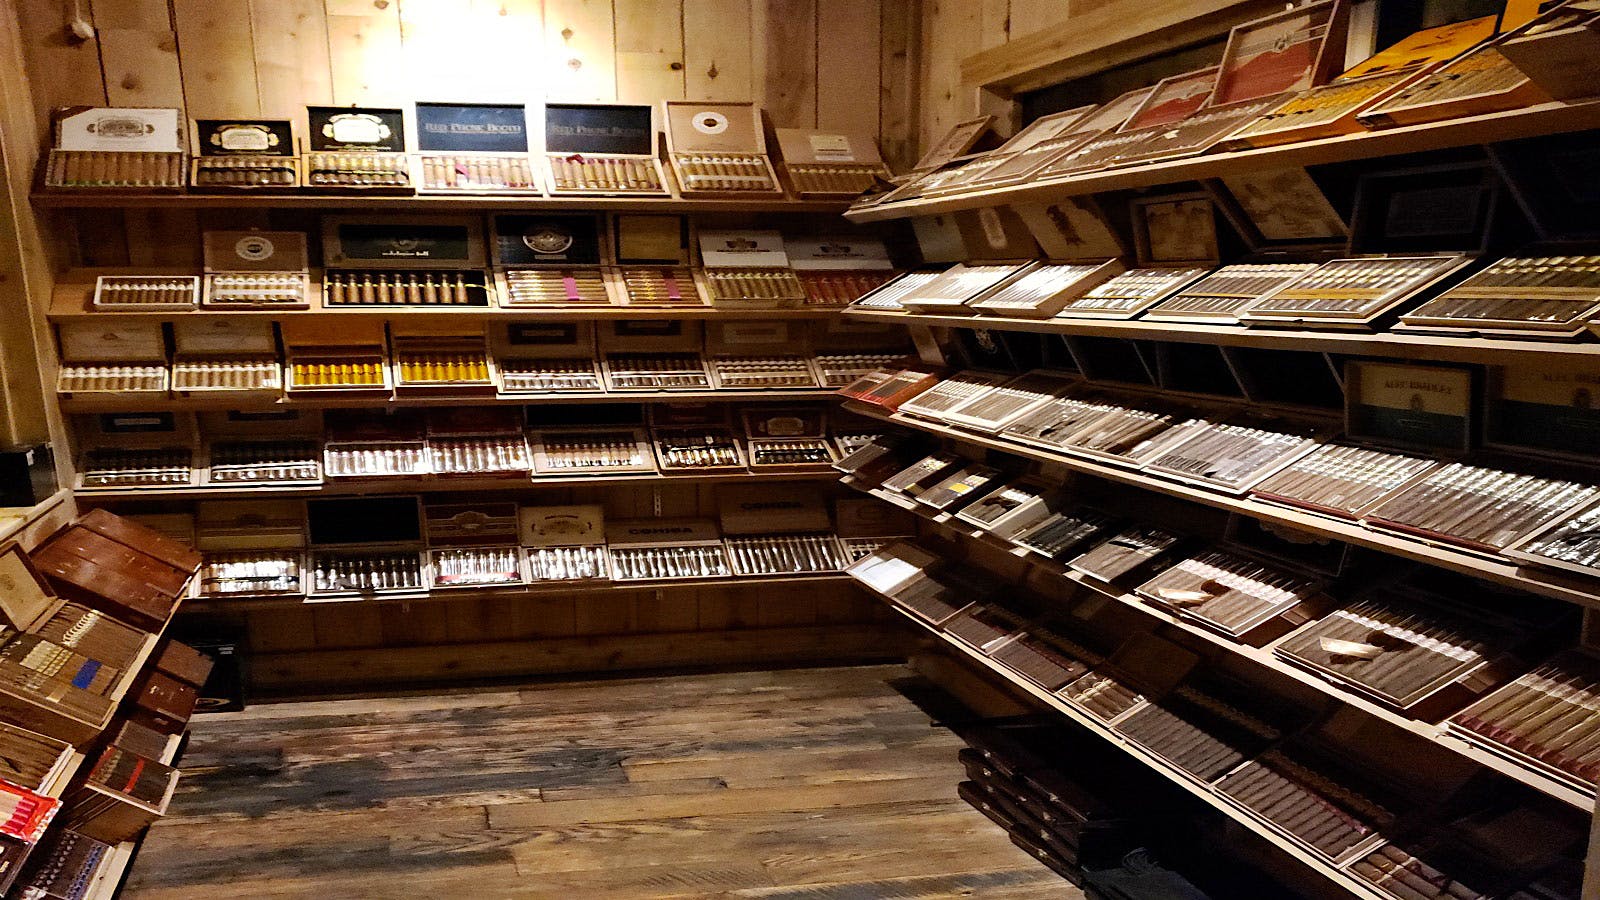 The humidor is well-stocked with more than 100 different cigars.